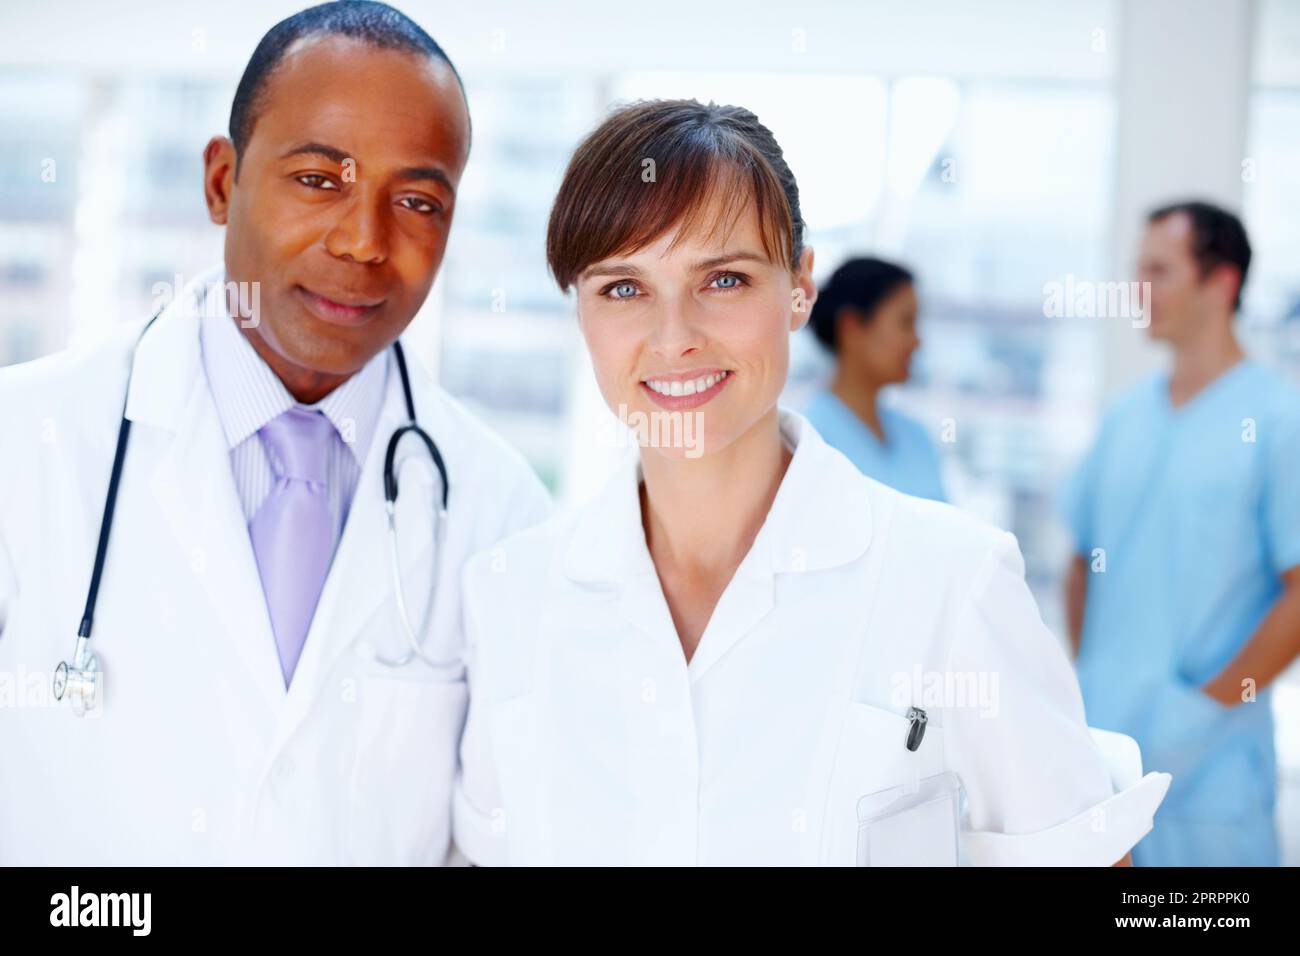 Healthcare professionals. Closeup of doctors with nurses in background. Stock Photo